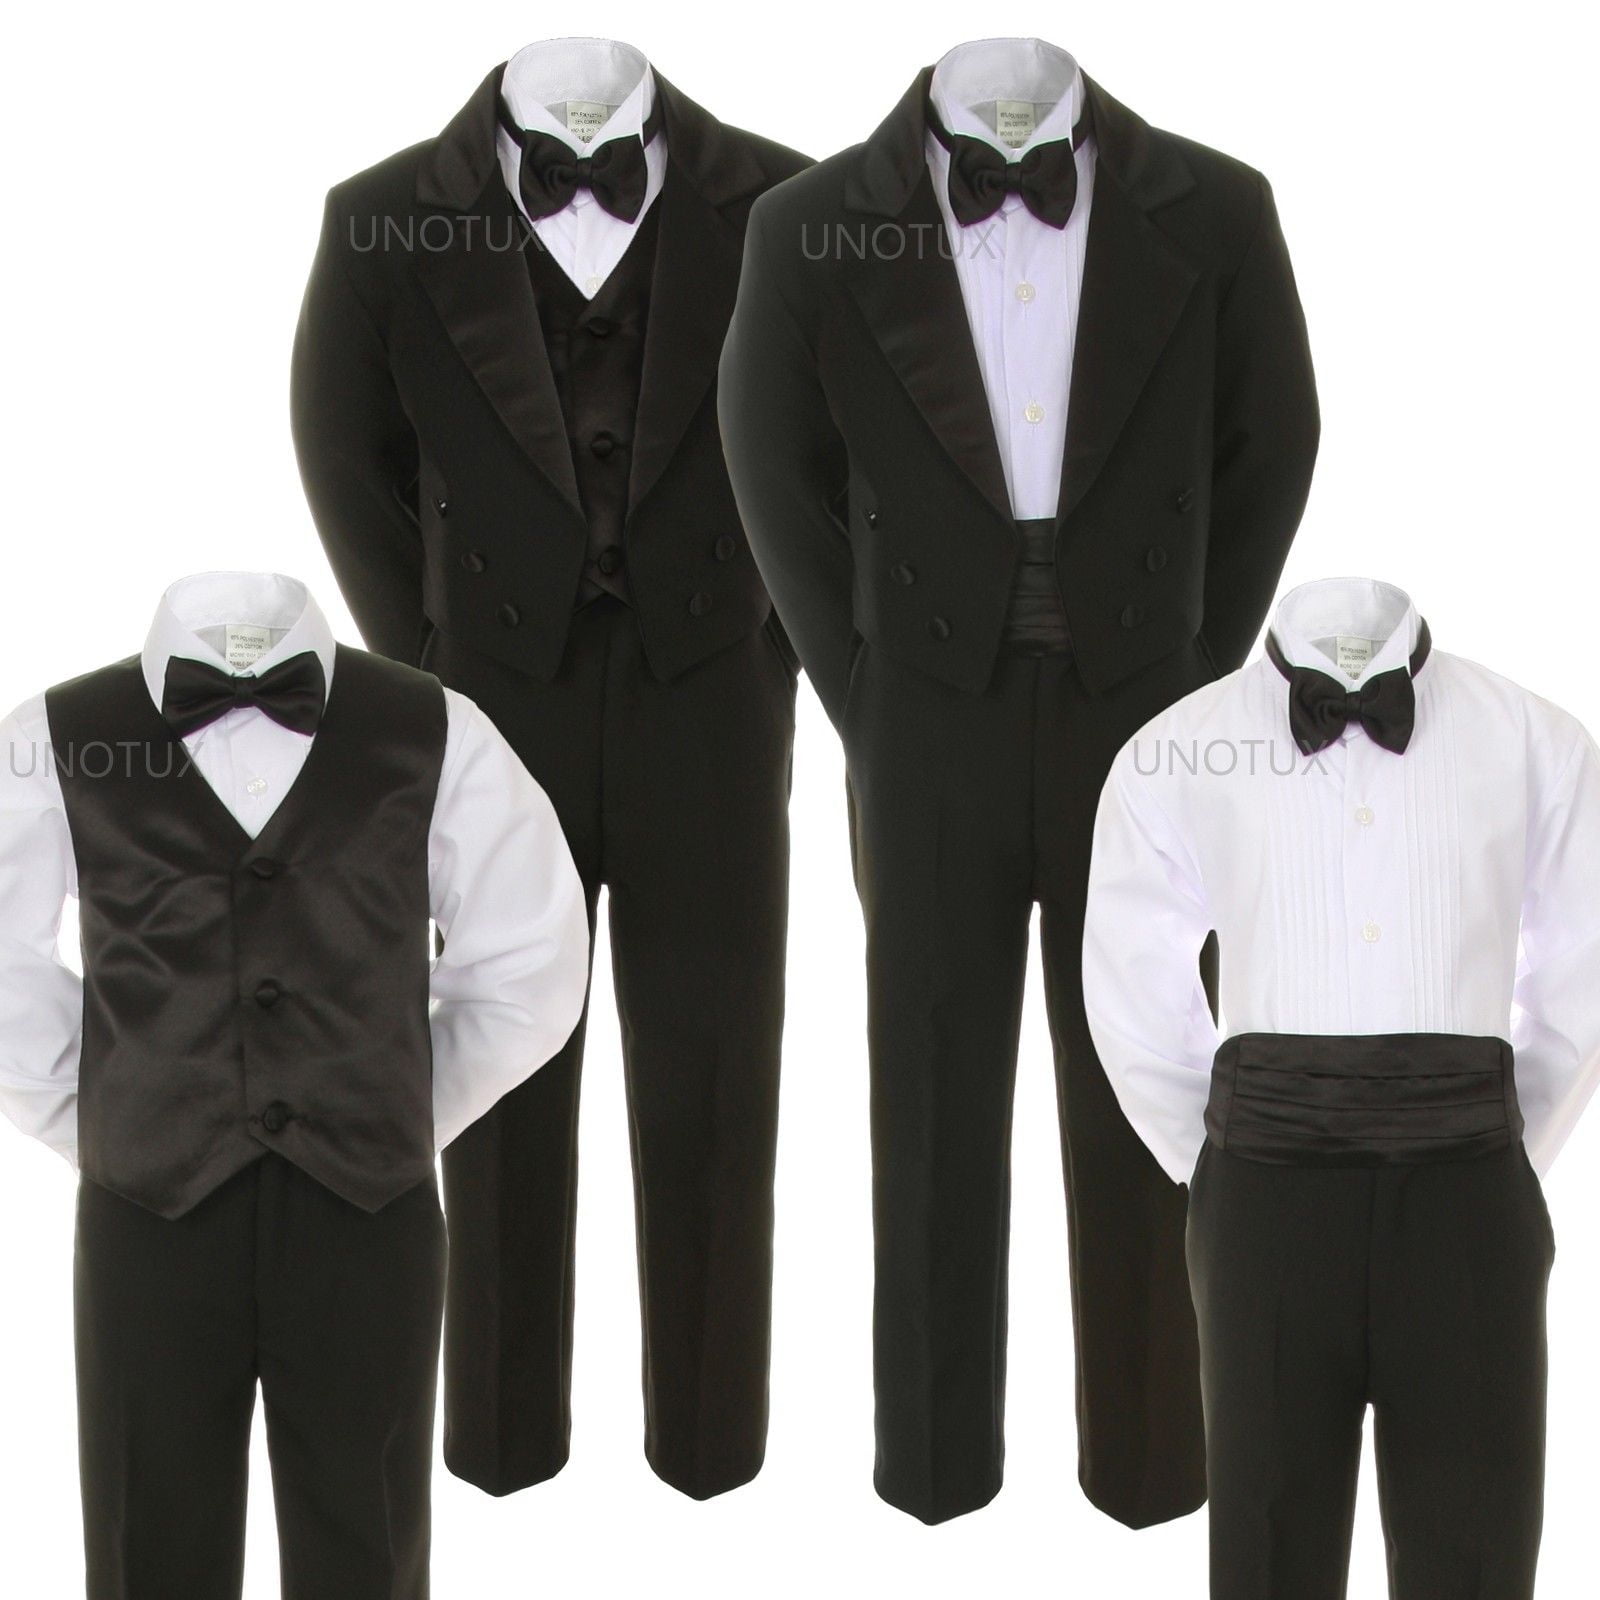 NEW Black Wedding Formal Tuxedo Suit for Baby Toddler & Boy S M L XL 2T 3T 4T-20 